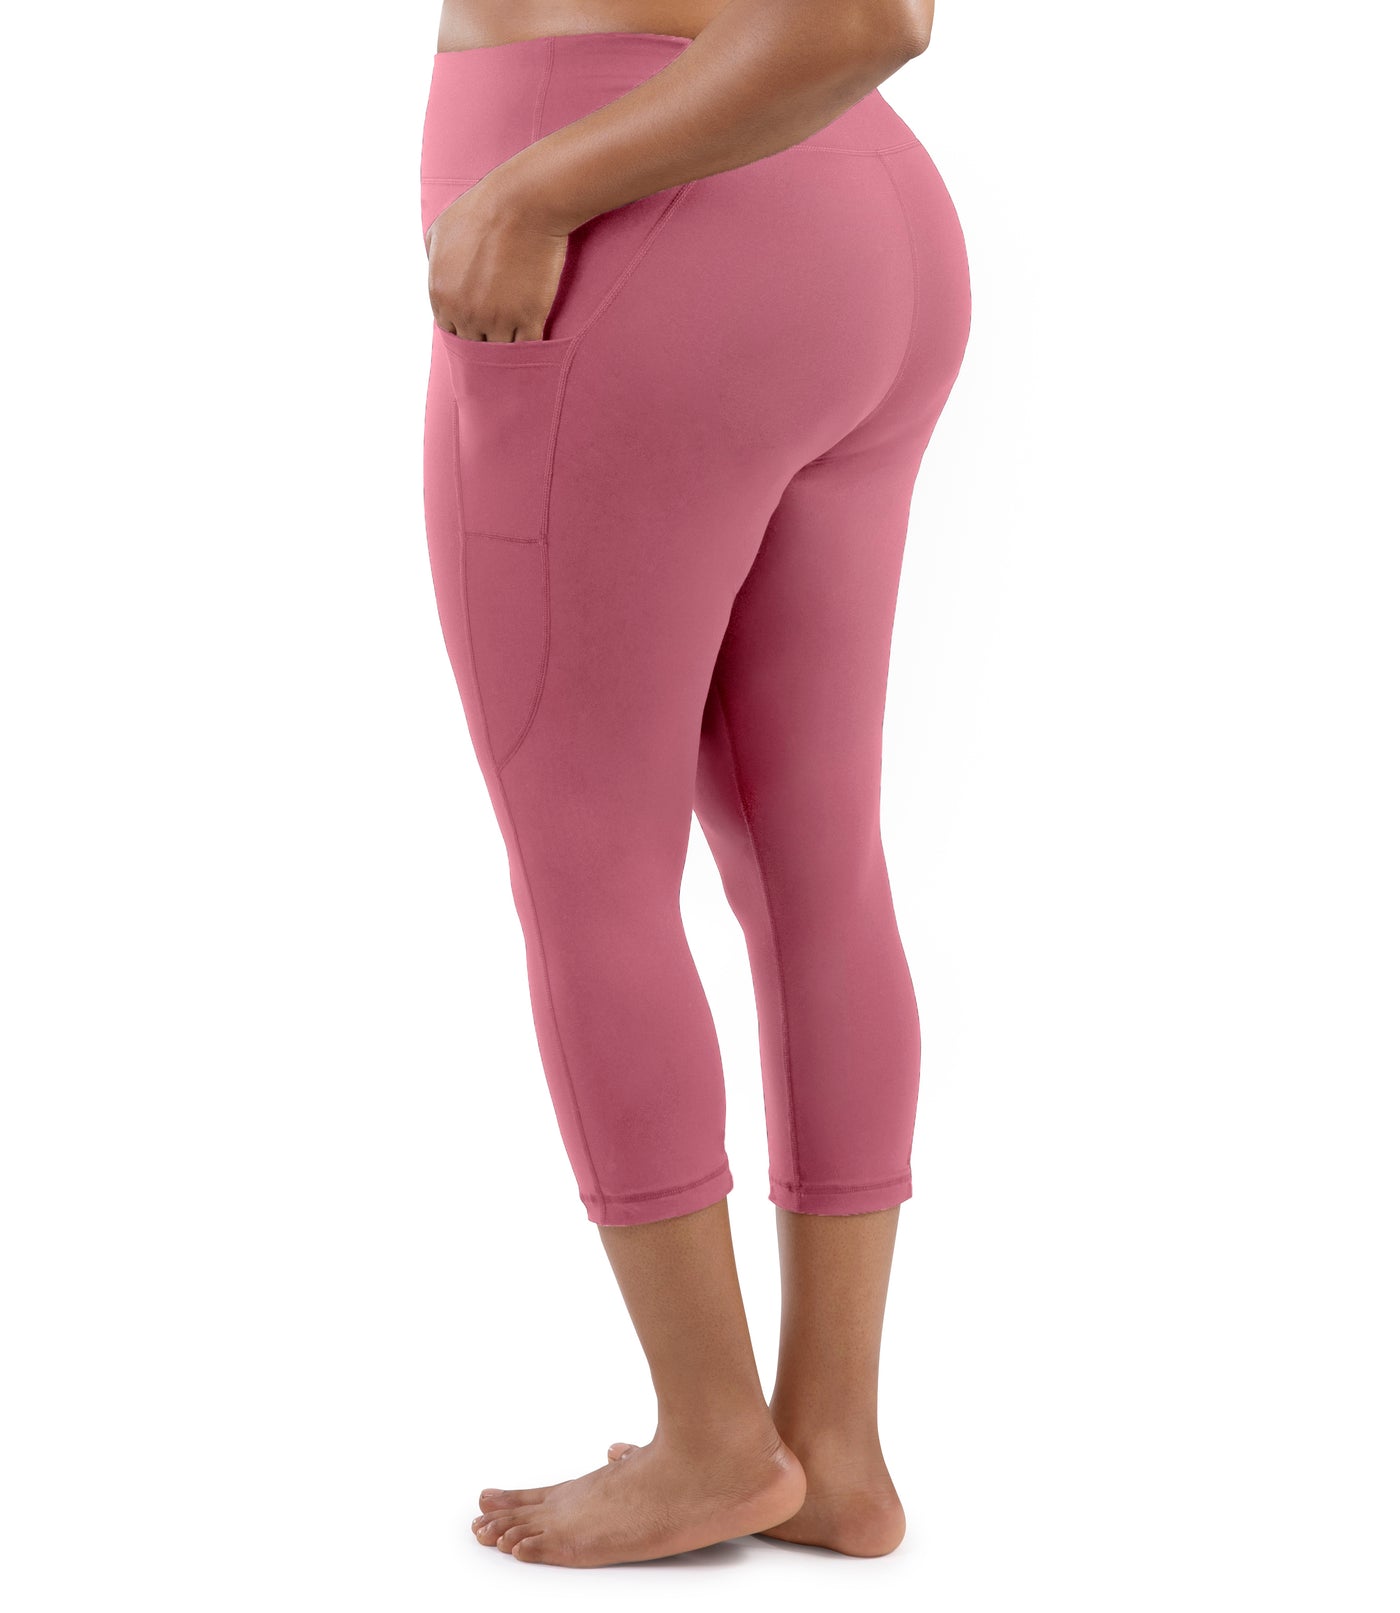 Bottom half of plus sized woman, facing back, wearing JunoActive JunoStretch Side Pocket Capris in warm mauve. The hem falls a few inches above ankle and have pockets on both sides.